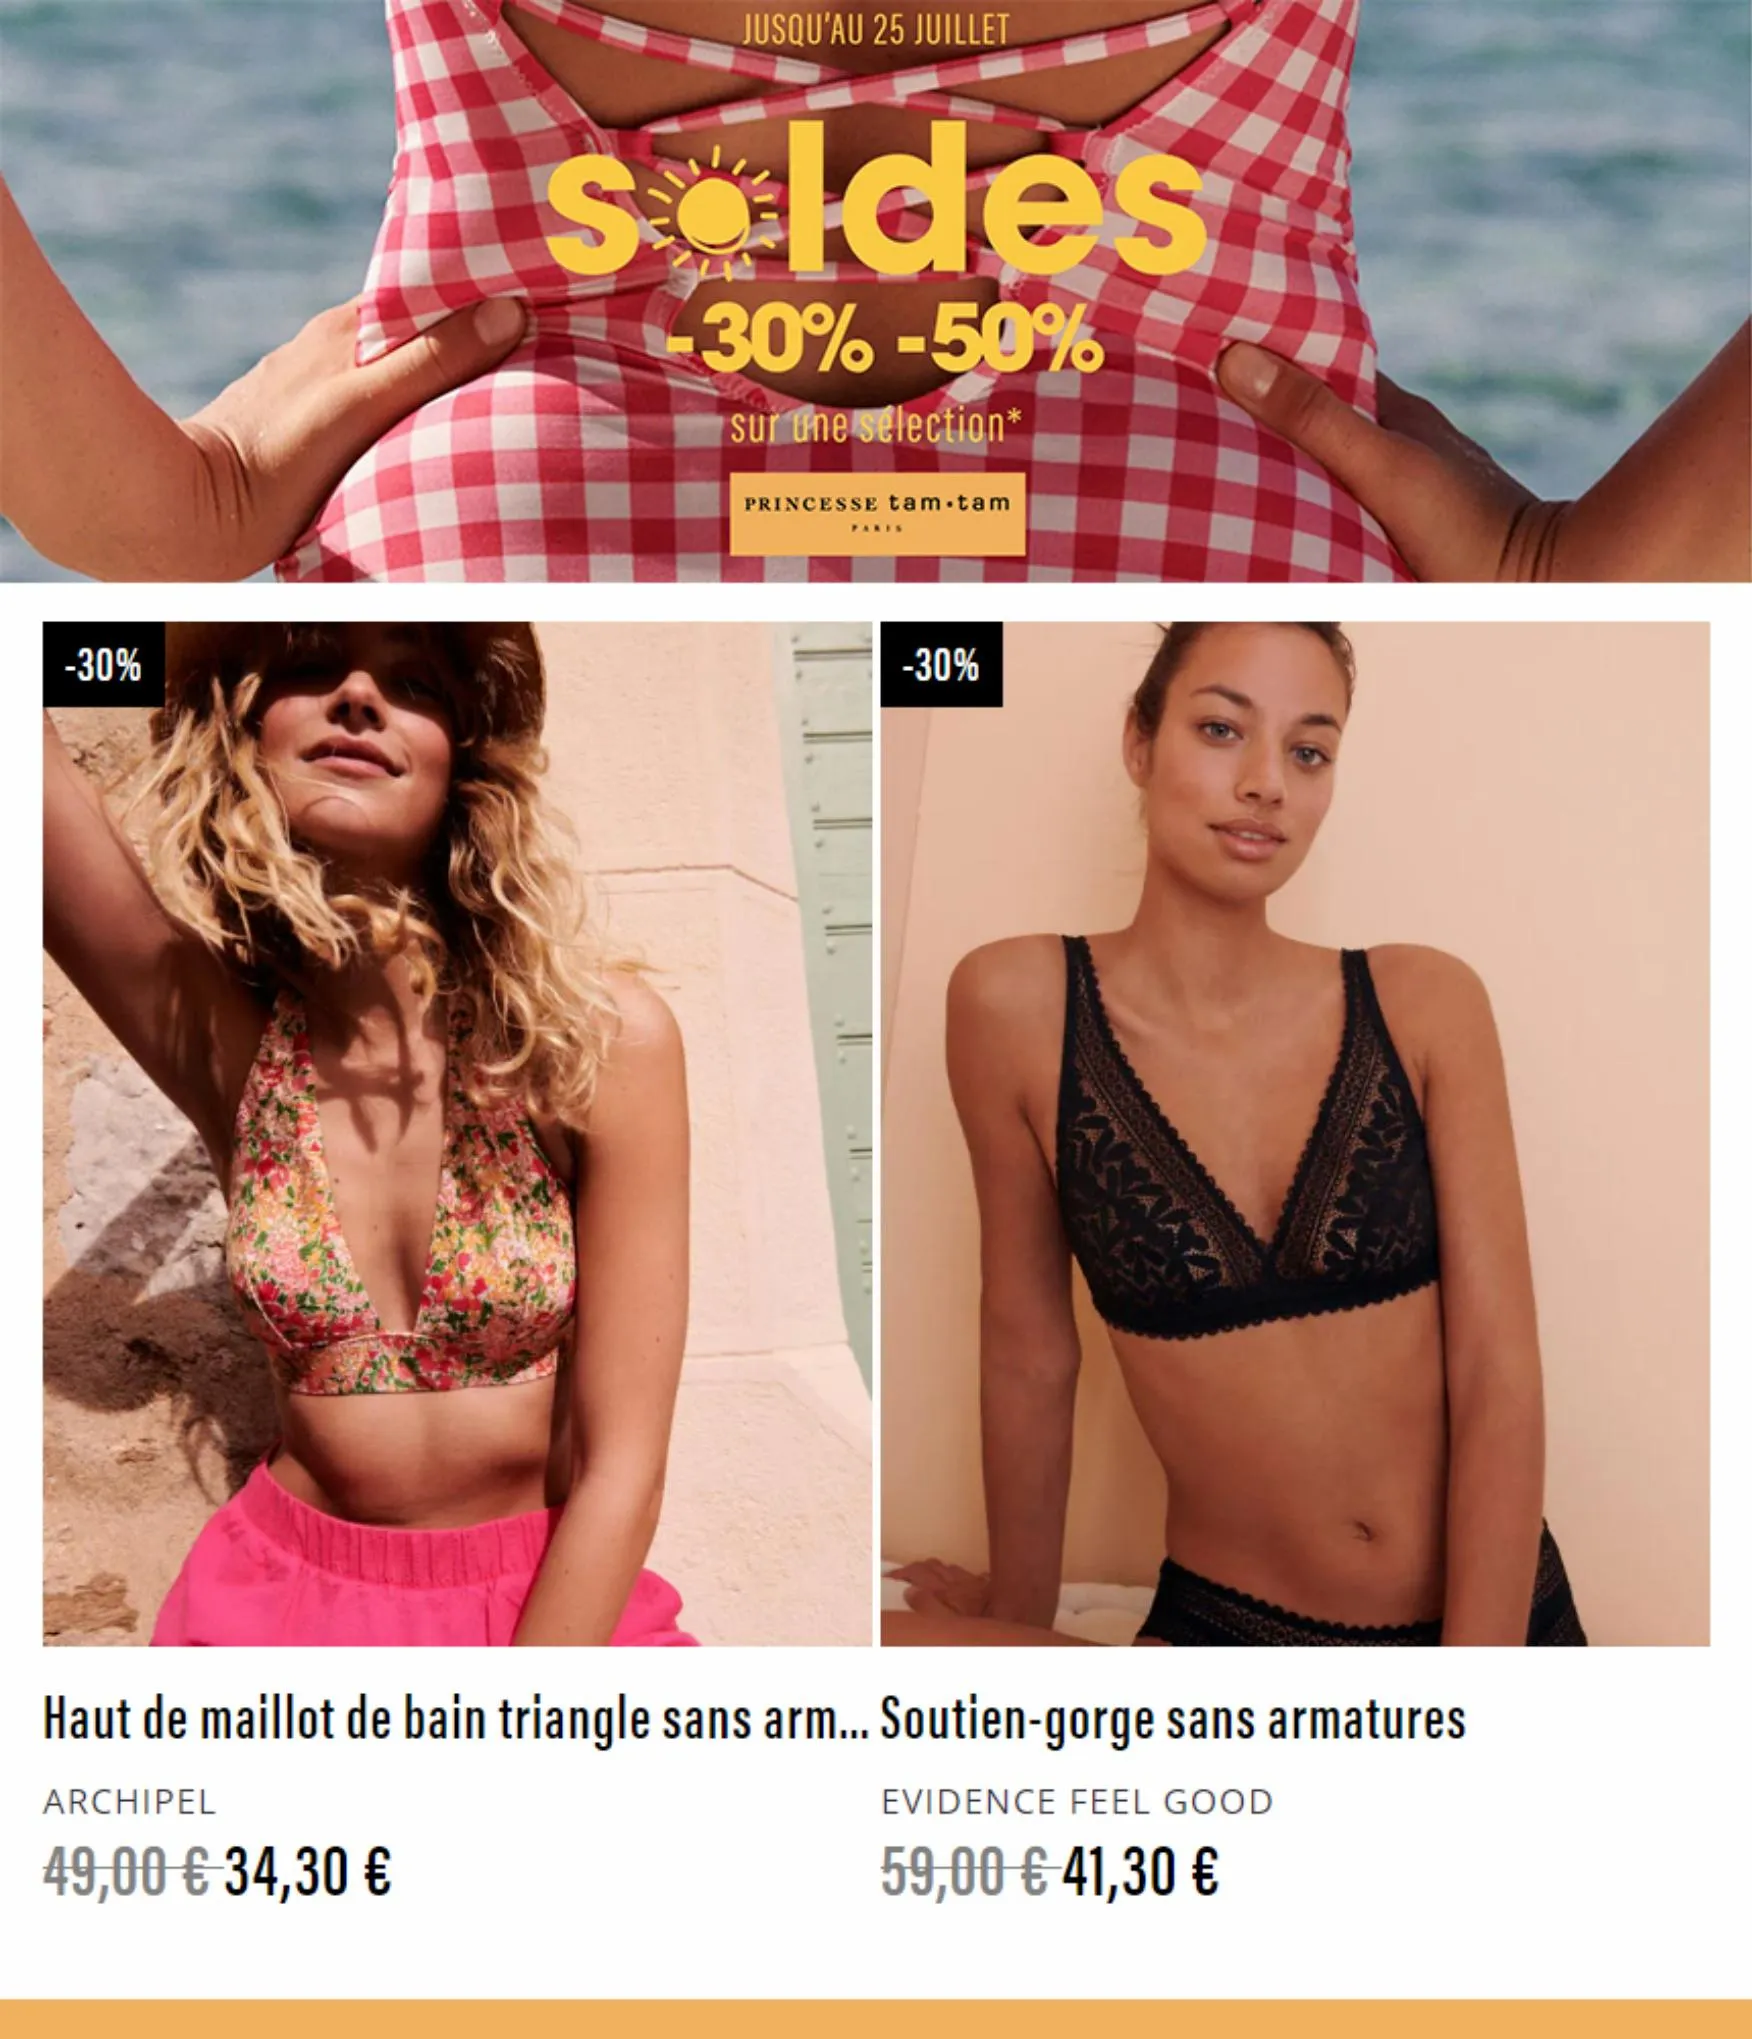 Catalogue SOLDES -30% -50%!, page 00005